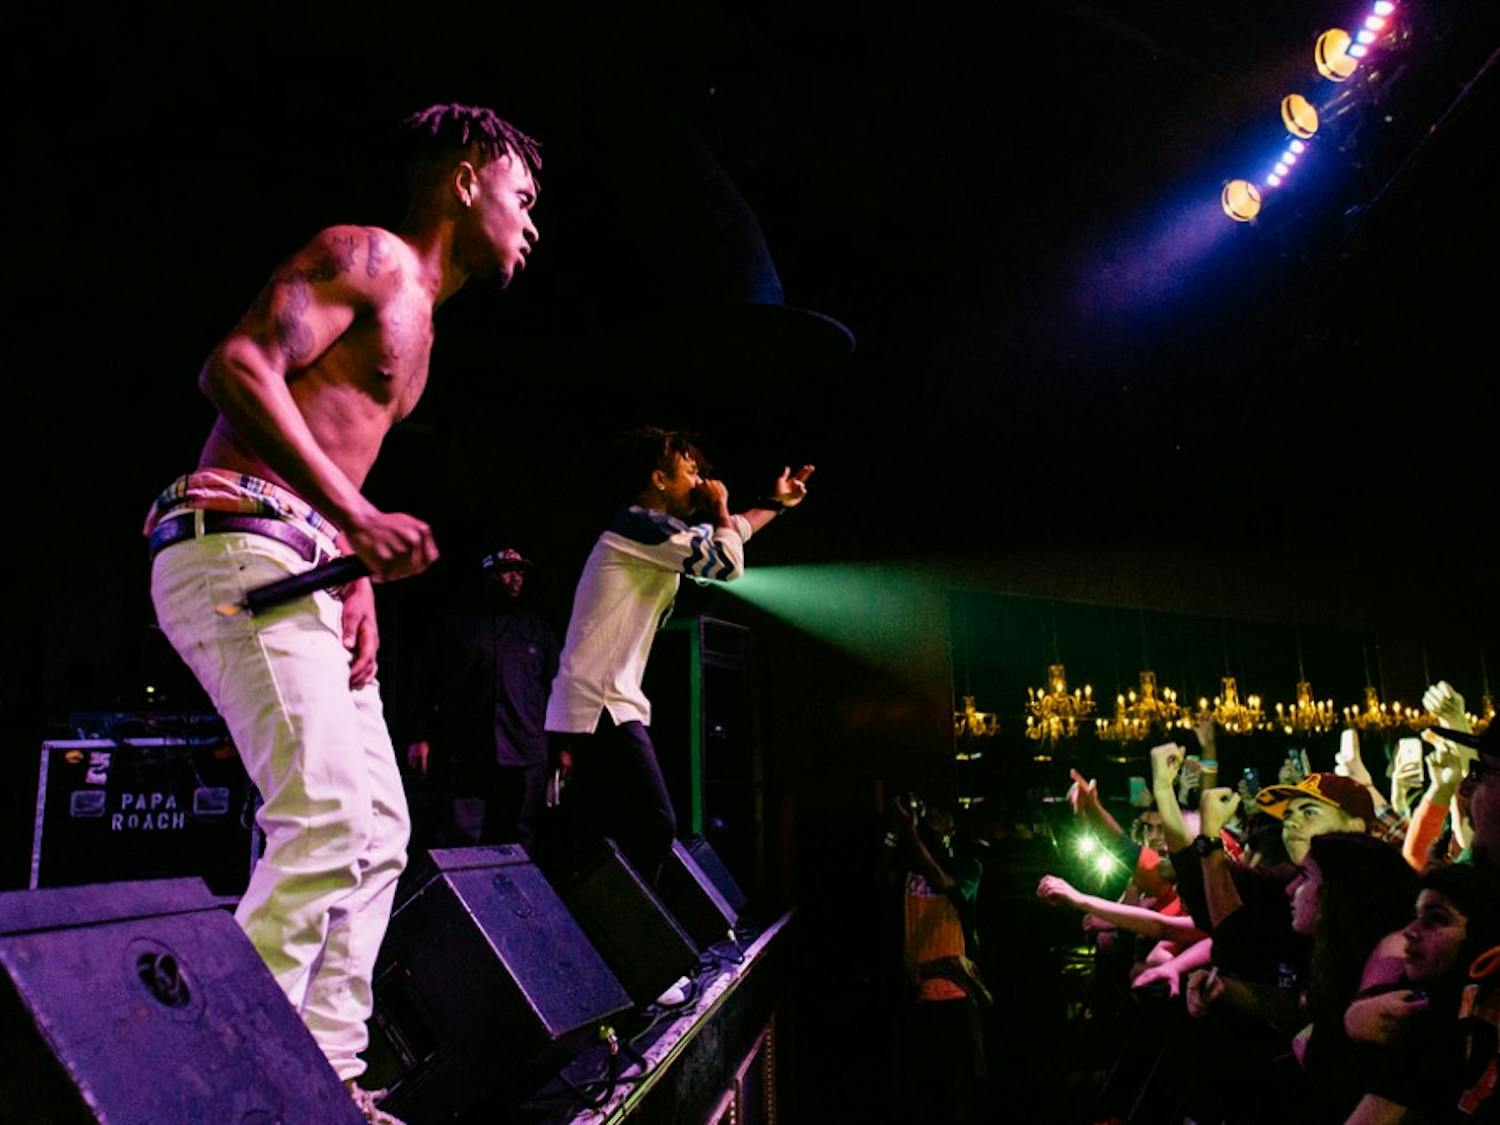 Rae Sremmurd, who performed a LDOC April this past spring, released a new album "SremmLife 2" that develops their voice as artists beyond the more pop-heavy styles of their last album.&nbsp;&nbsp;